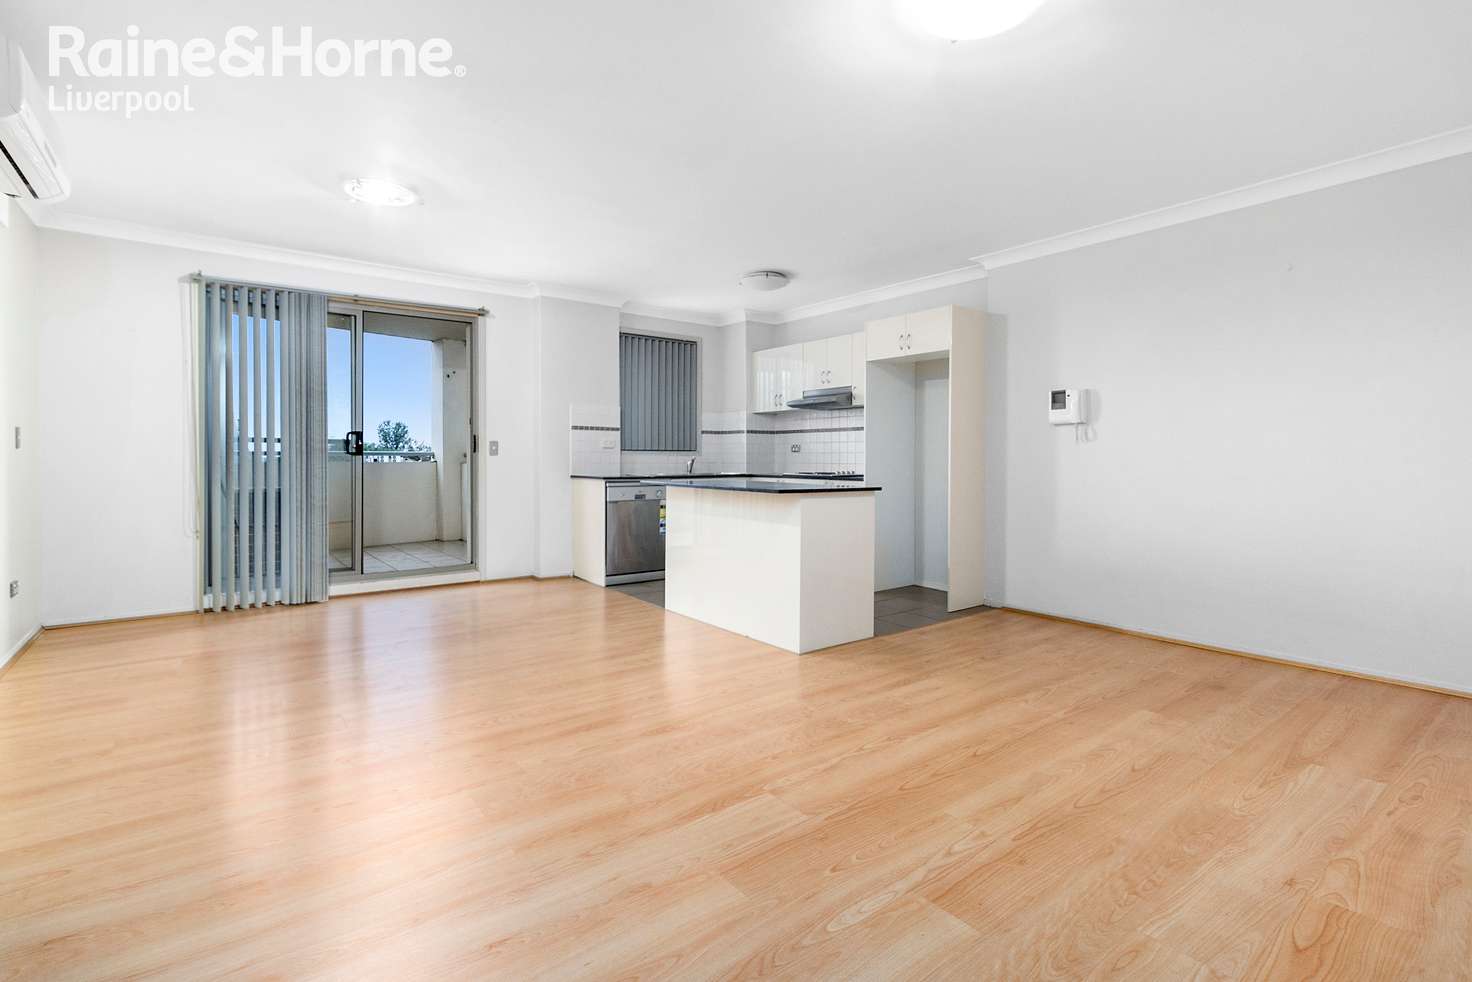 Main view of Homely unit listing, 35/4-6 Lachlan Street, Liverpool NSW 2170